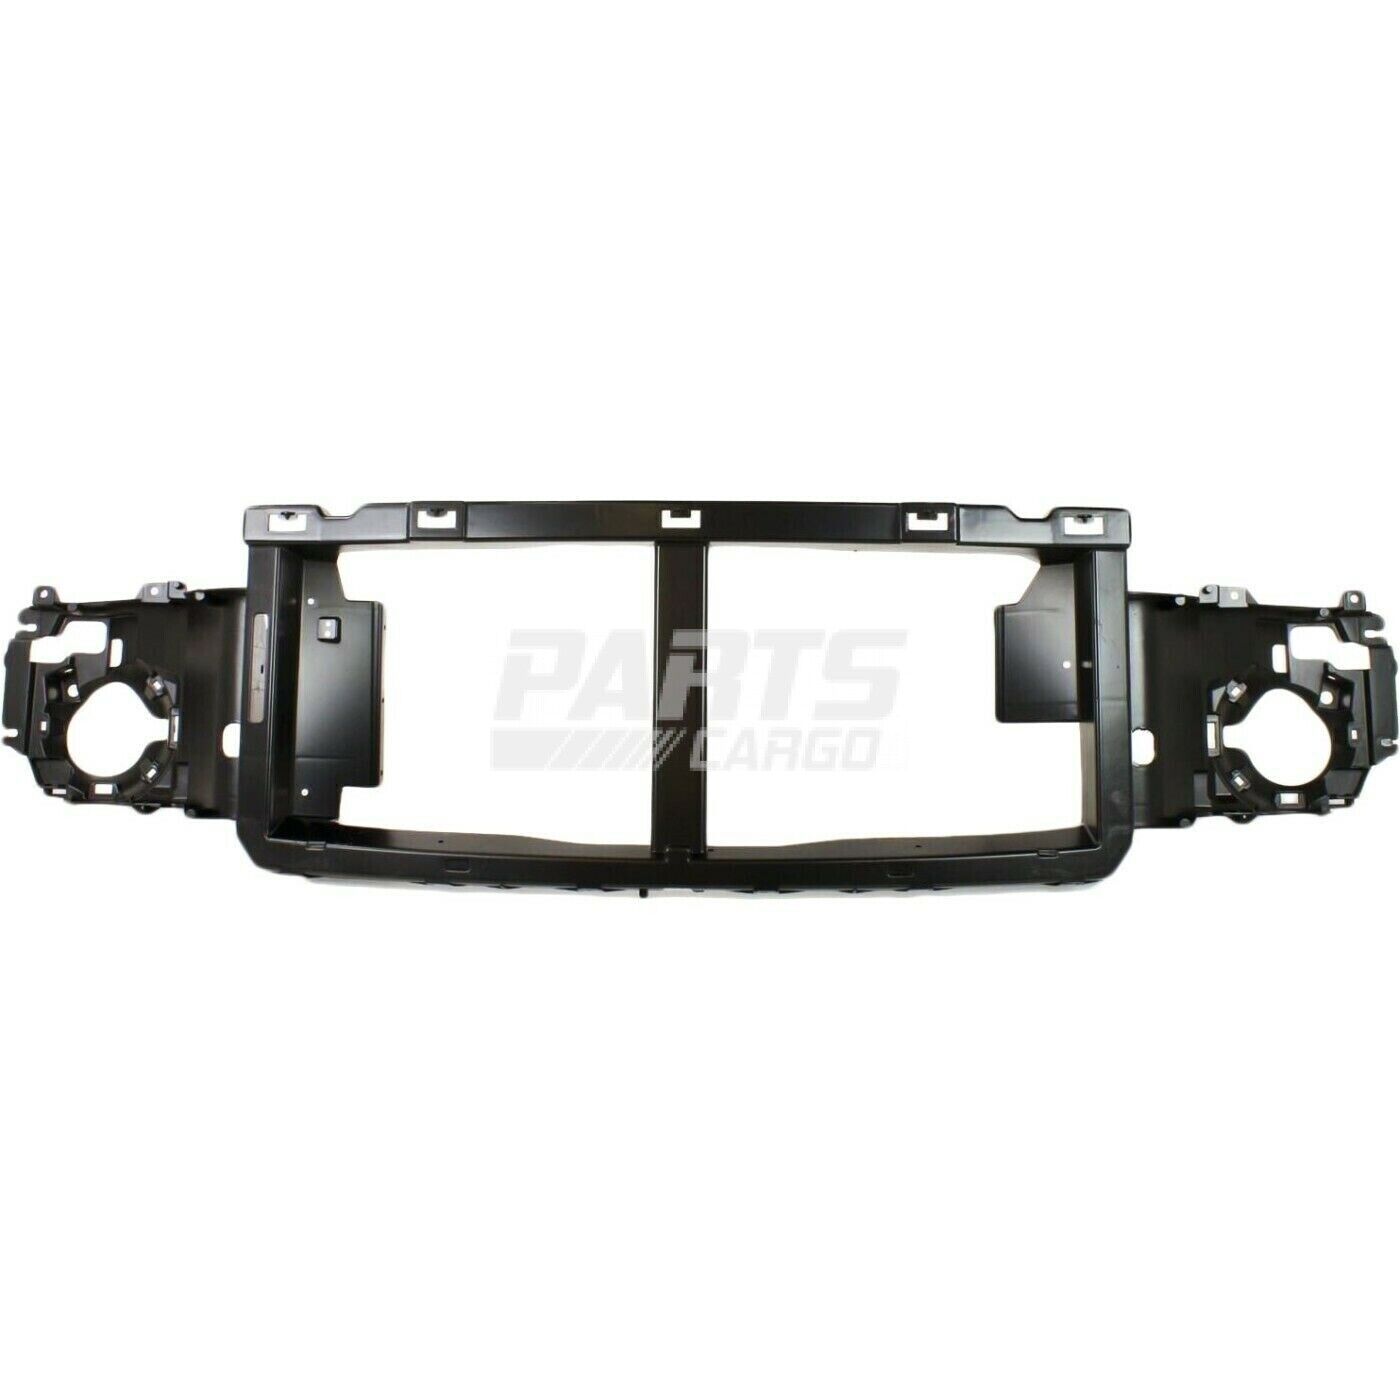 New Header Panel ABS Plastic For 2005-2007 Ford F-Series Super Duty 6C3Z8A284A